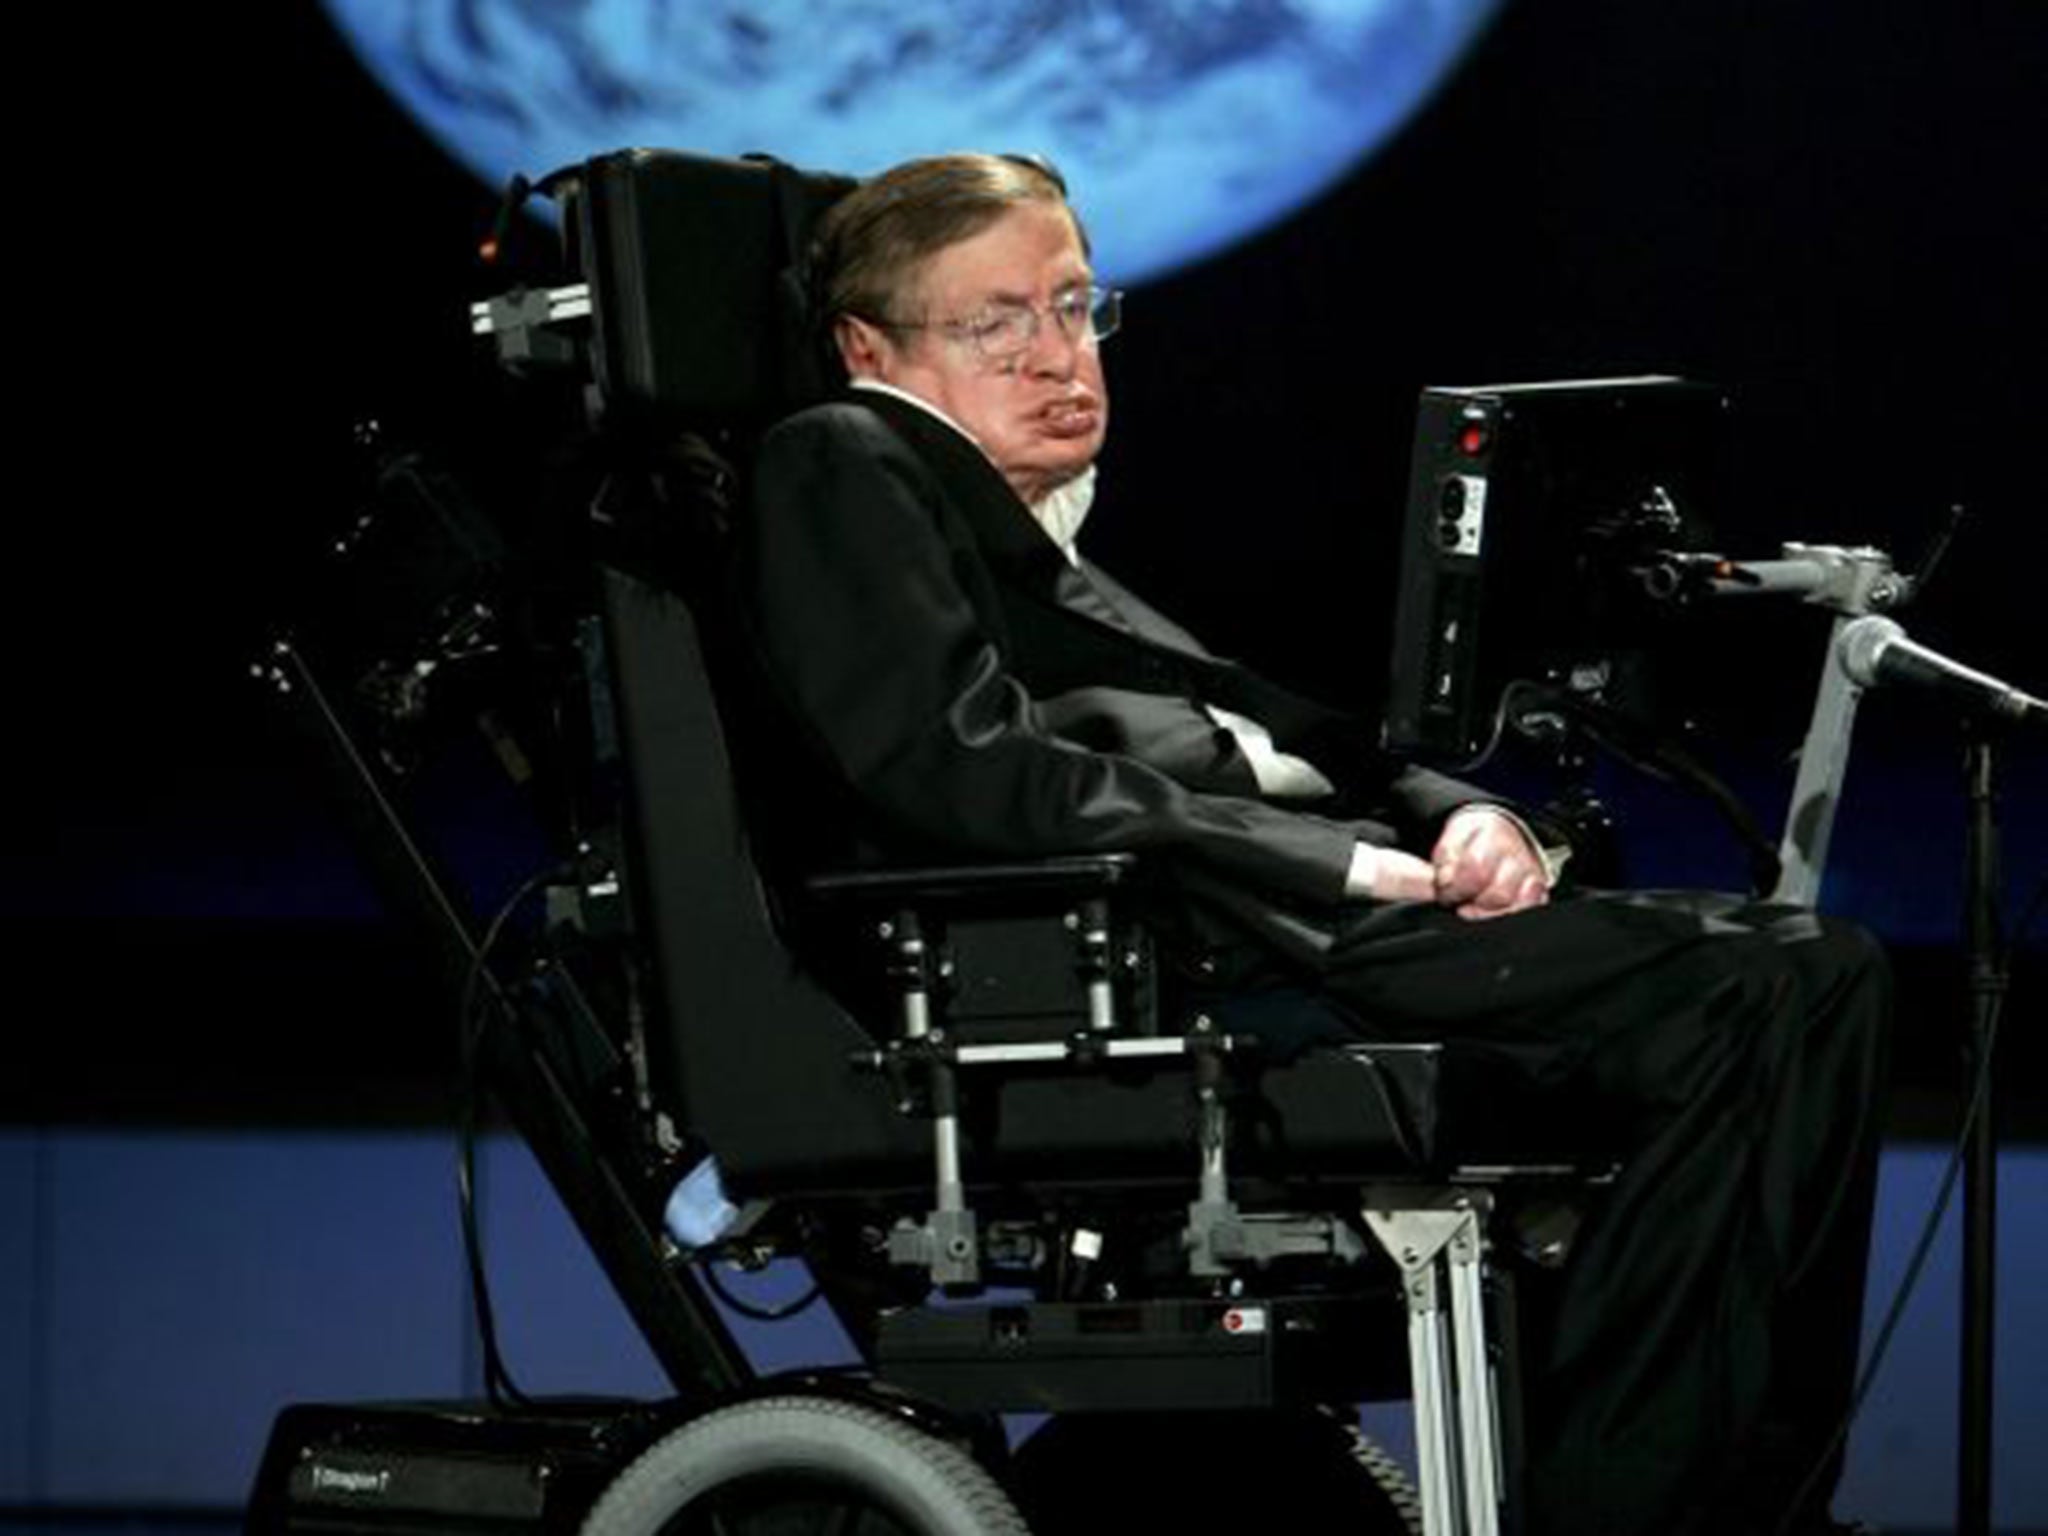 Mr Hawking said he supported many of Mr Corbyn's policies